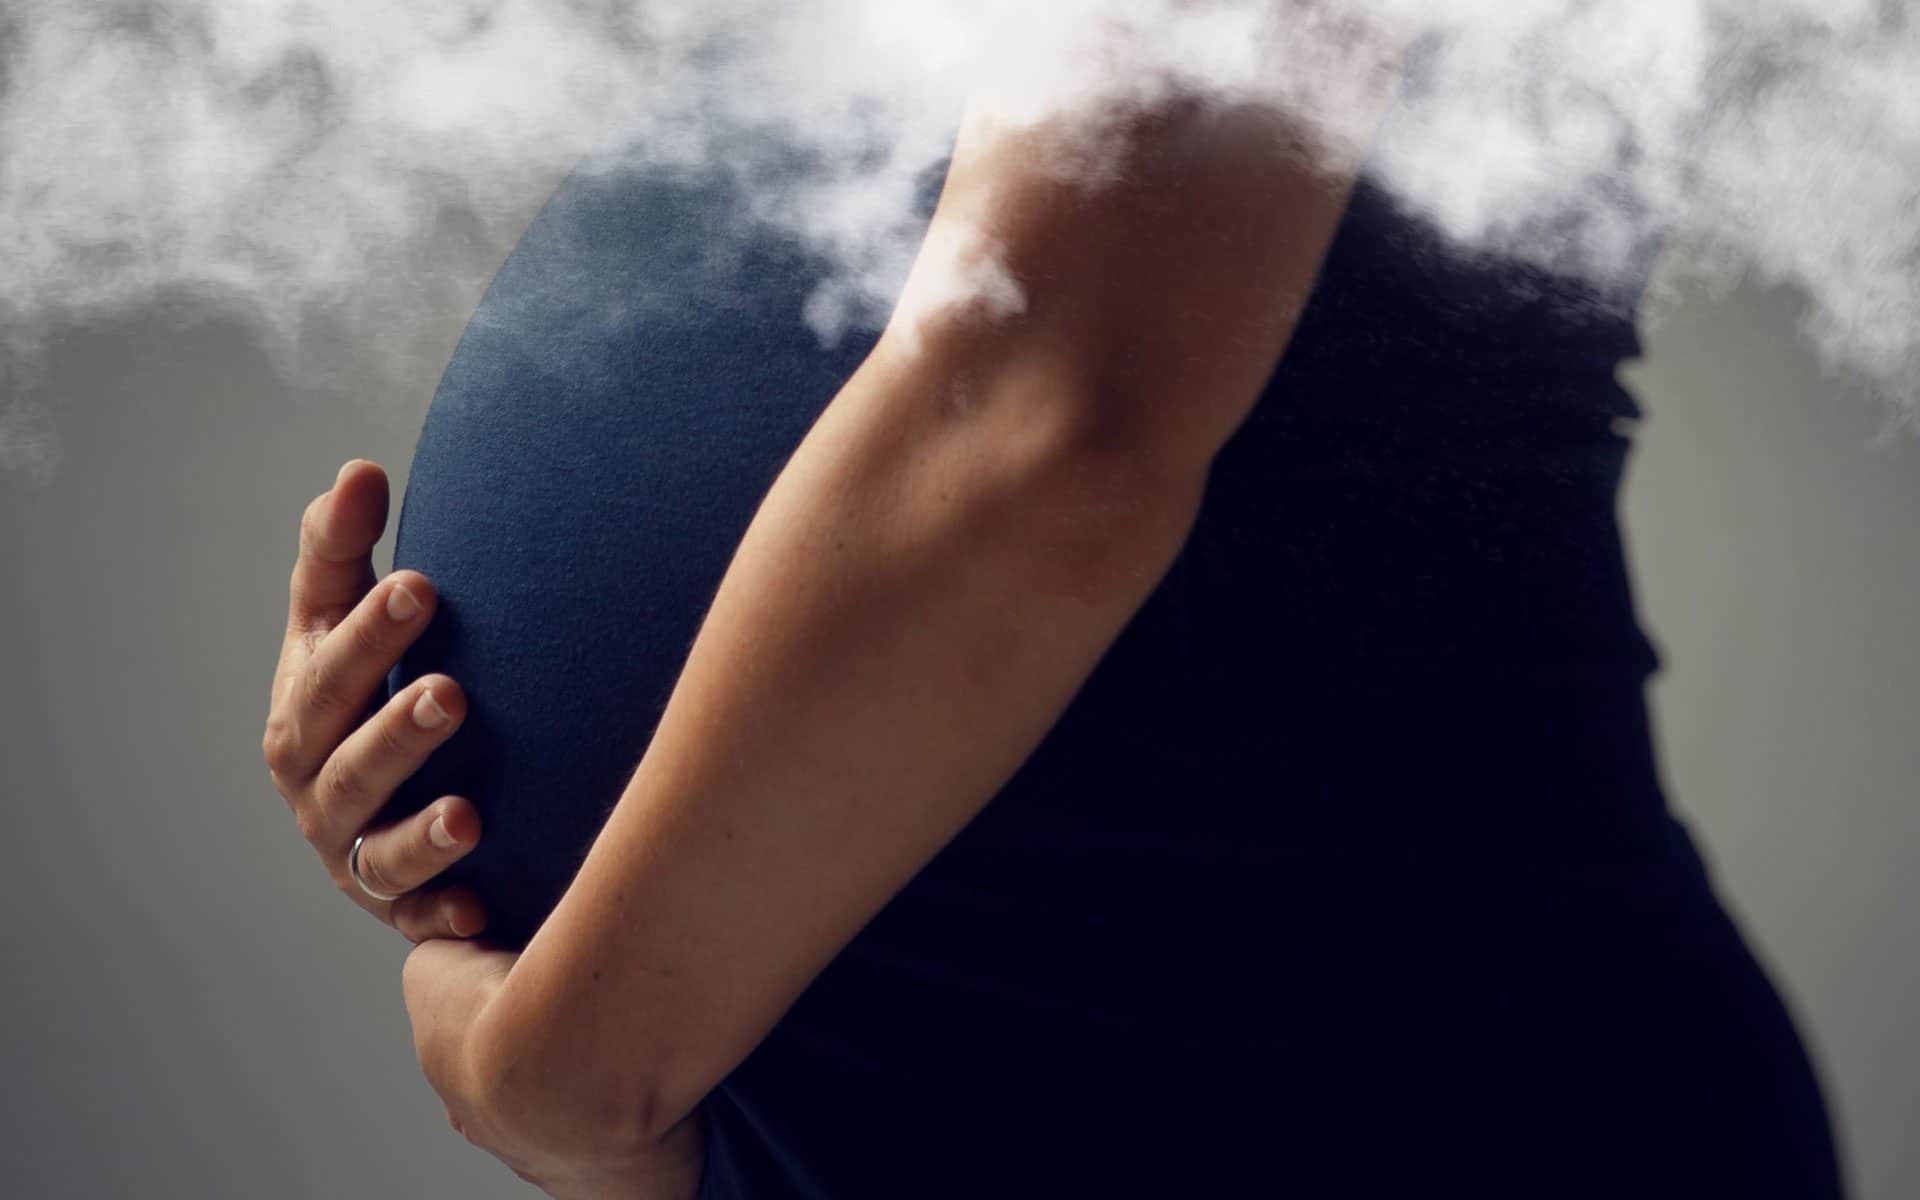 These Women Are Smoking Weed While Pregnant